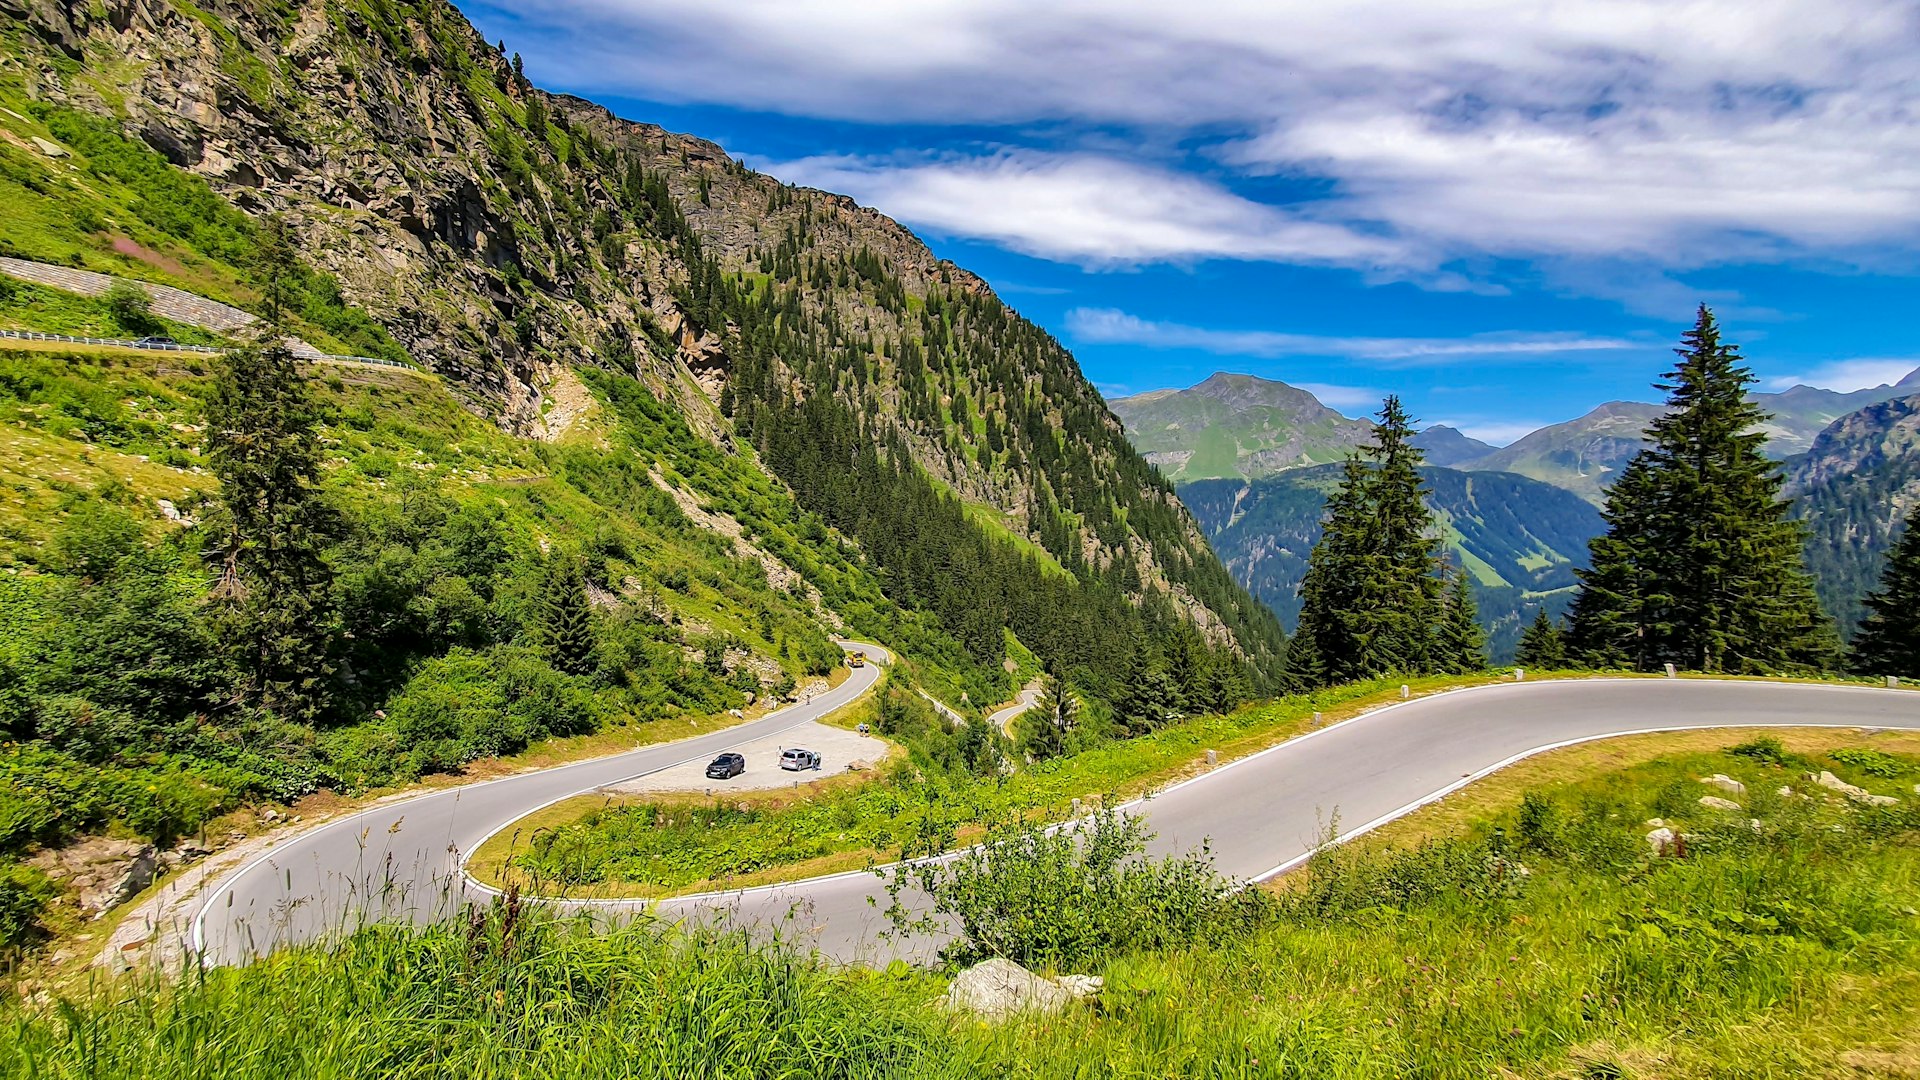 Cars on a road with tight bends winding through a mountainous region in the sunshine